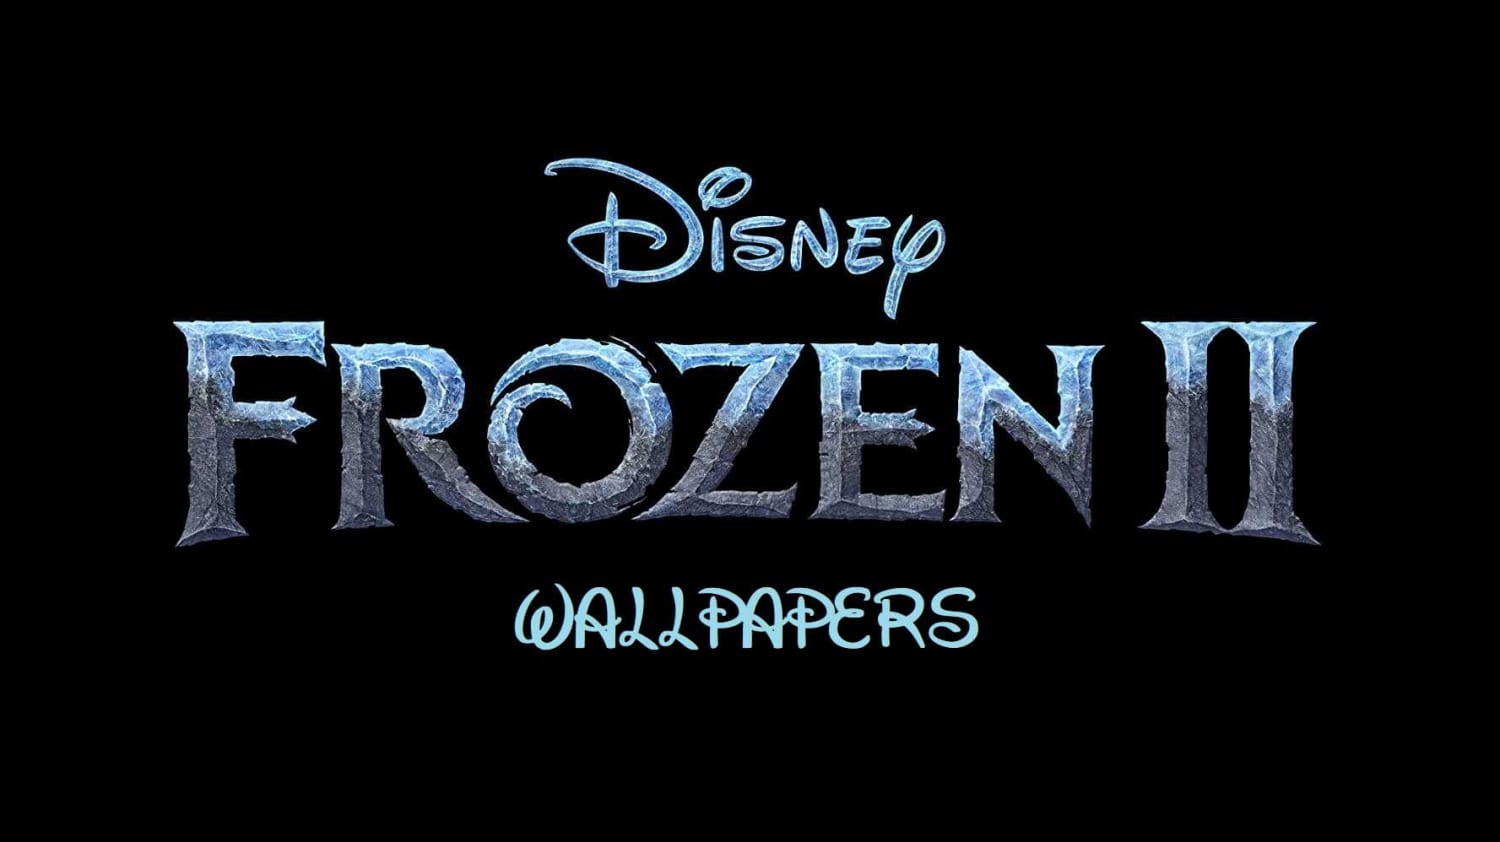 Frozen 2 HD Wallpapers 4K Backgrounds for Computer and Phone